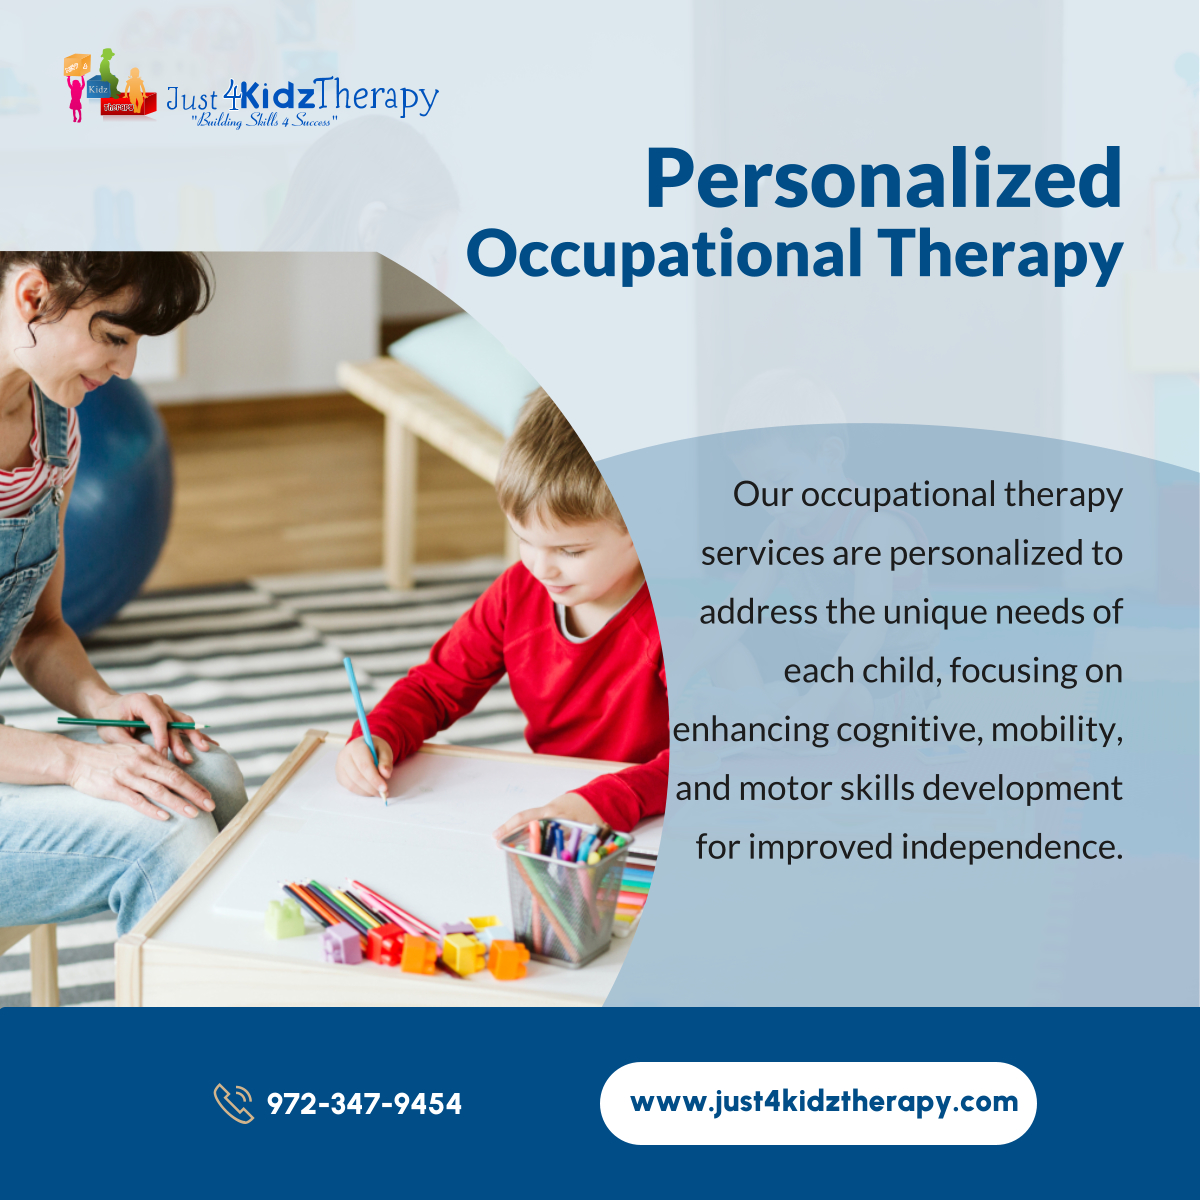 Experience the difference between personalized occupational therapy tailored to your child's needs. Empower them to thrive in their daily activities. 

#CollinCountyTX #PediatricTherapyServices #OccupationalTherapy #ChildDevelopment #ChildrensIndependence